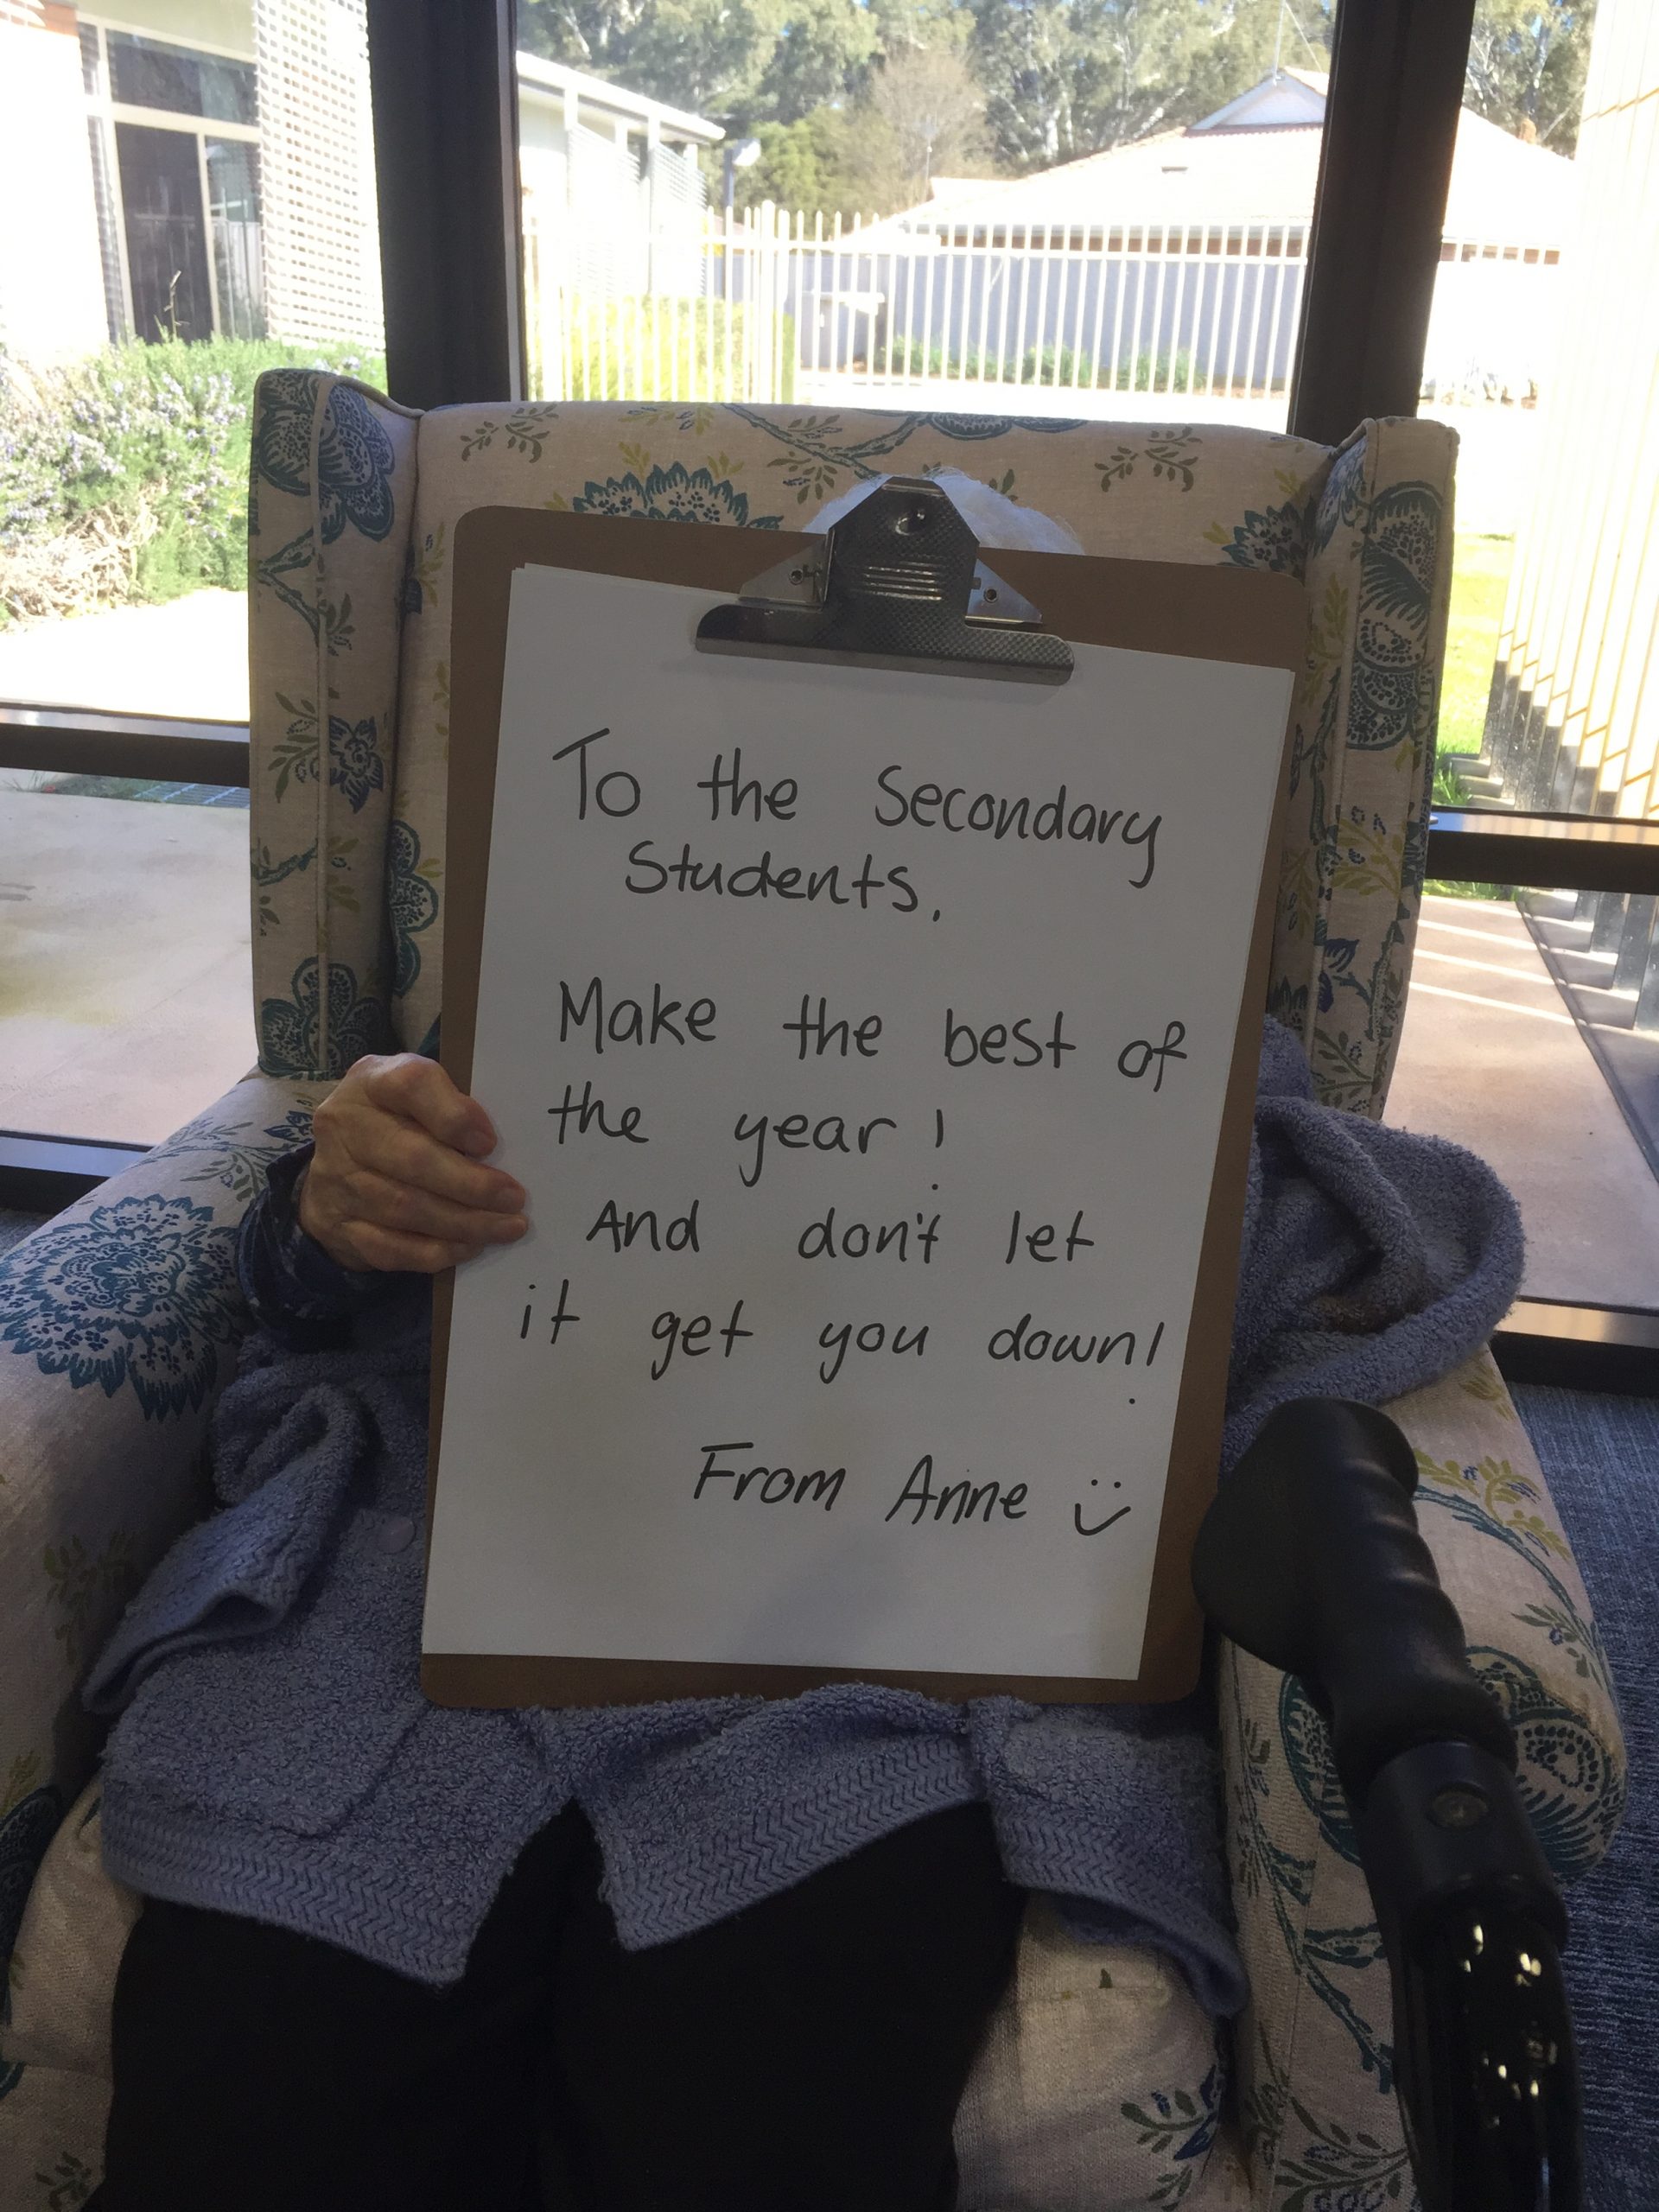 Anne, a resident, sits in an armchair and holds up a clipboard with a hand written message on it. The clipboard is obscuring her face. The message reads: "To the Secondary Students, Make the best of the year! And don't let it get you down! From Anne"